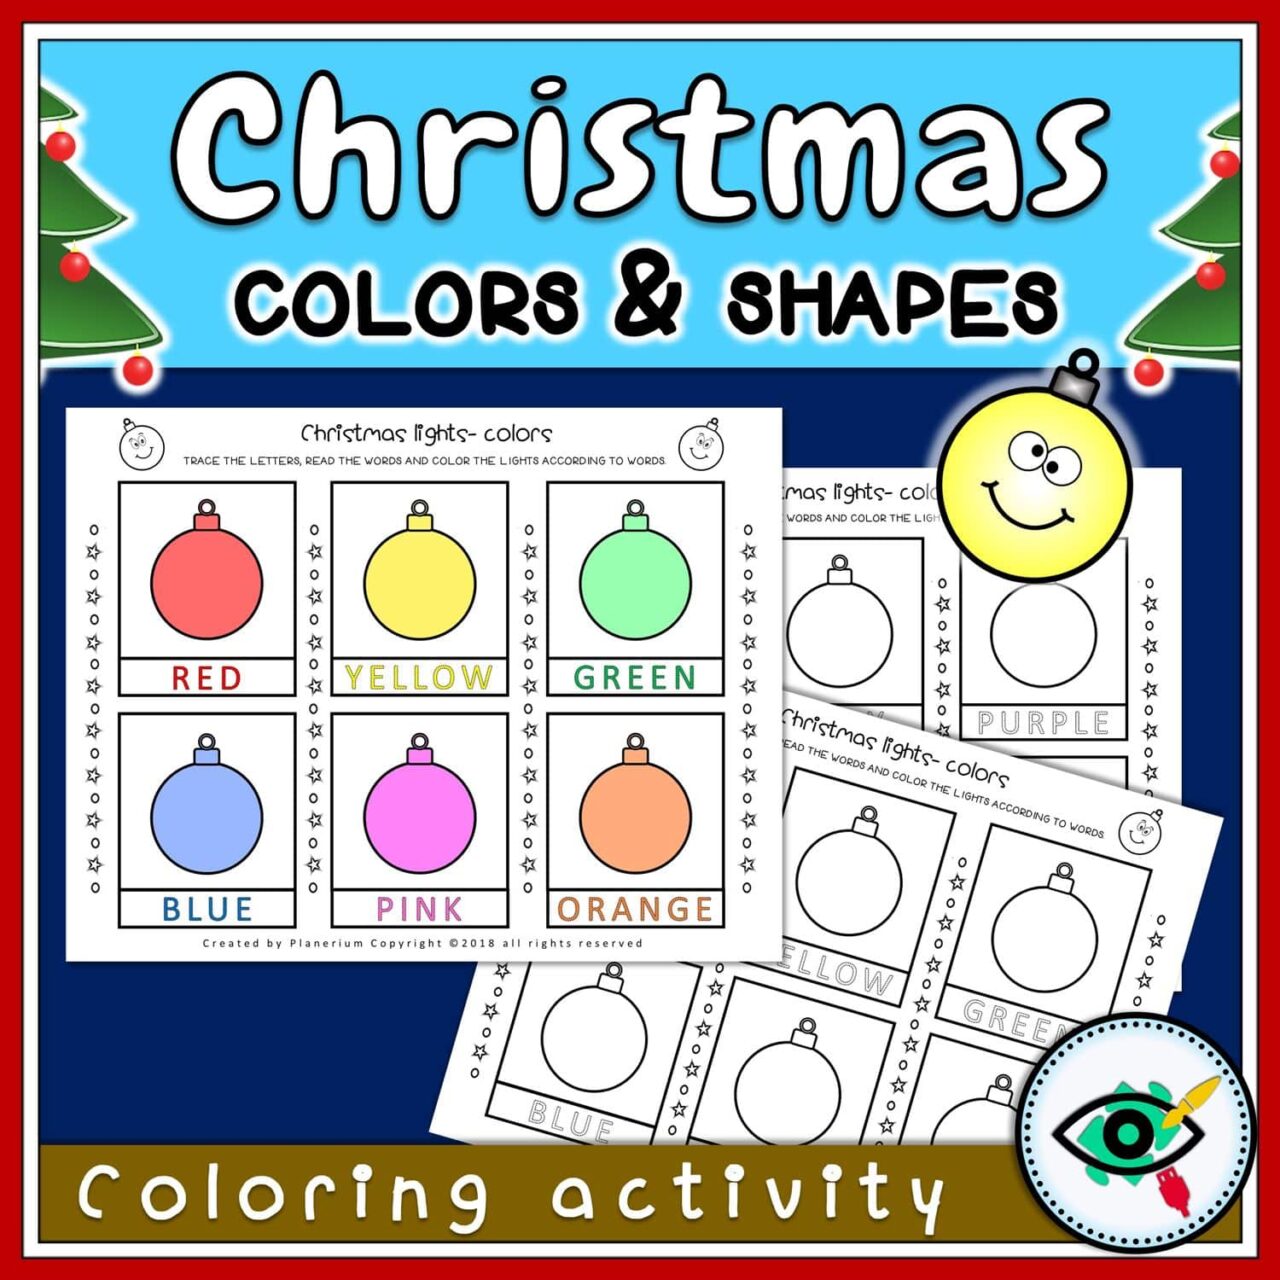 Christmas Coloring Activity - Shapes and Lights - Featured 2 | Planerium